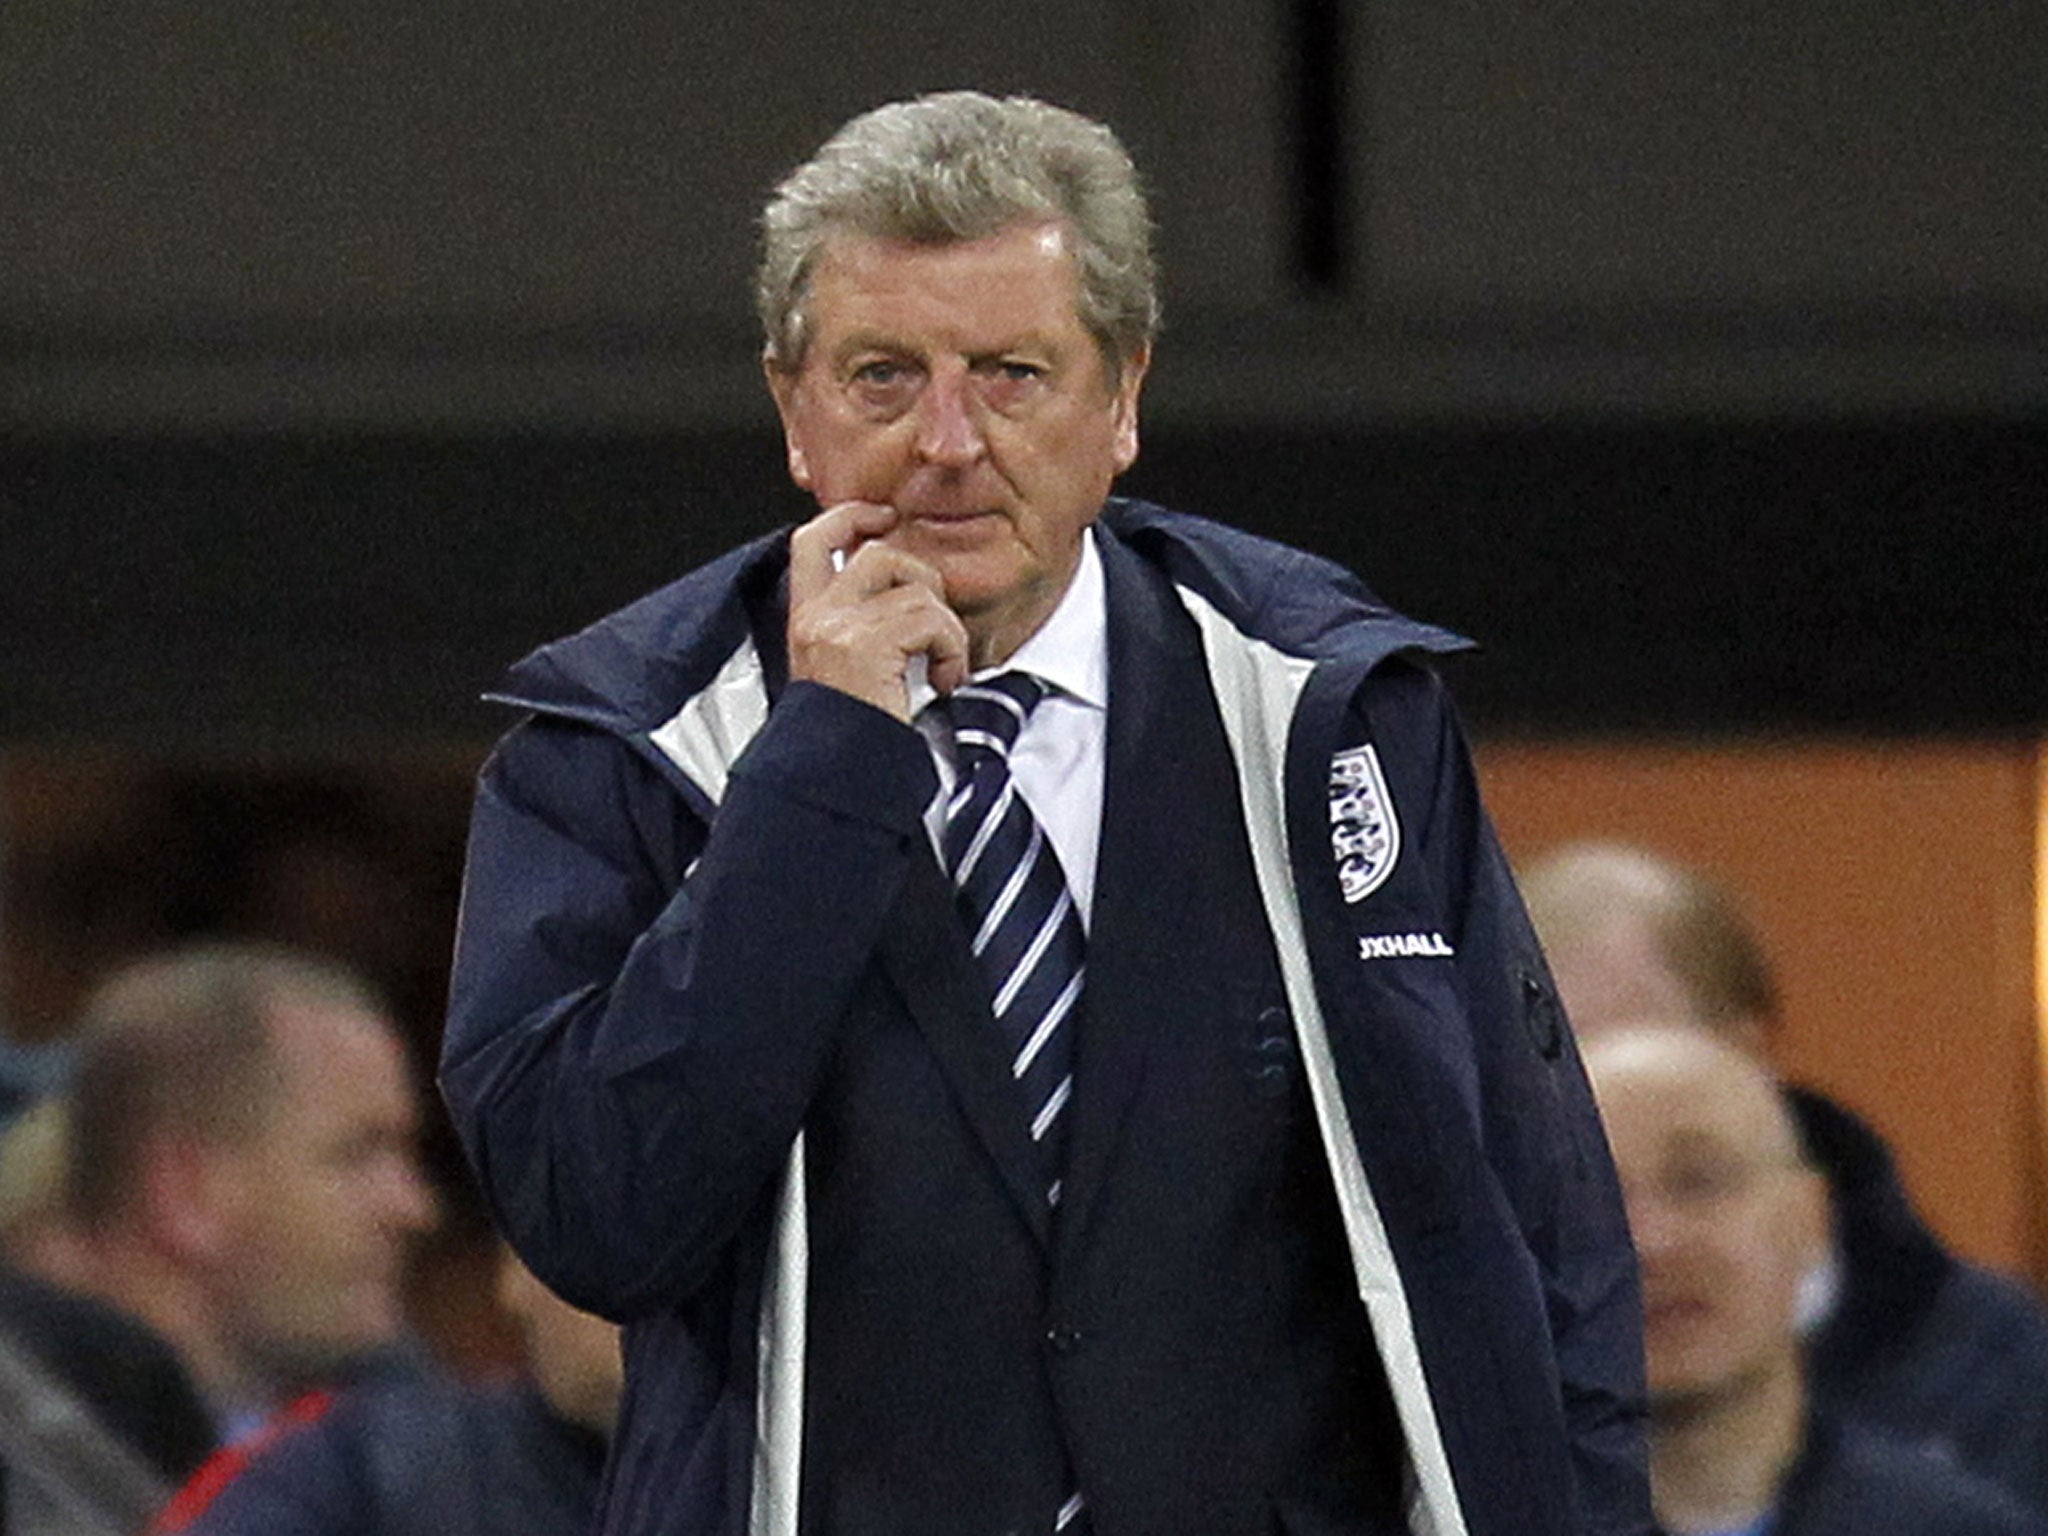 Roy Hodgson has received backing from Graham Taylor and Graeme Le Saux